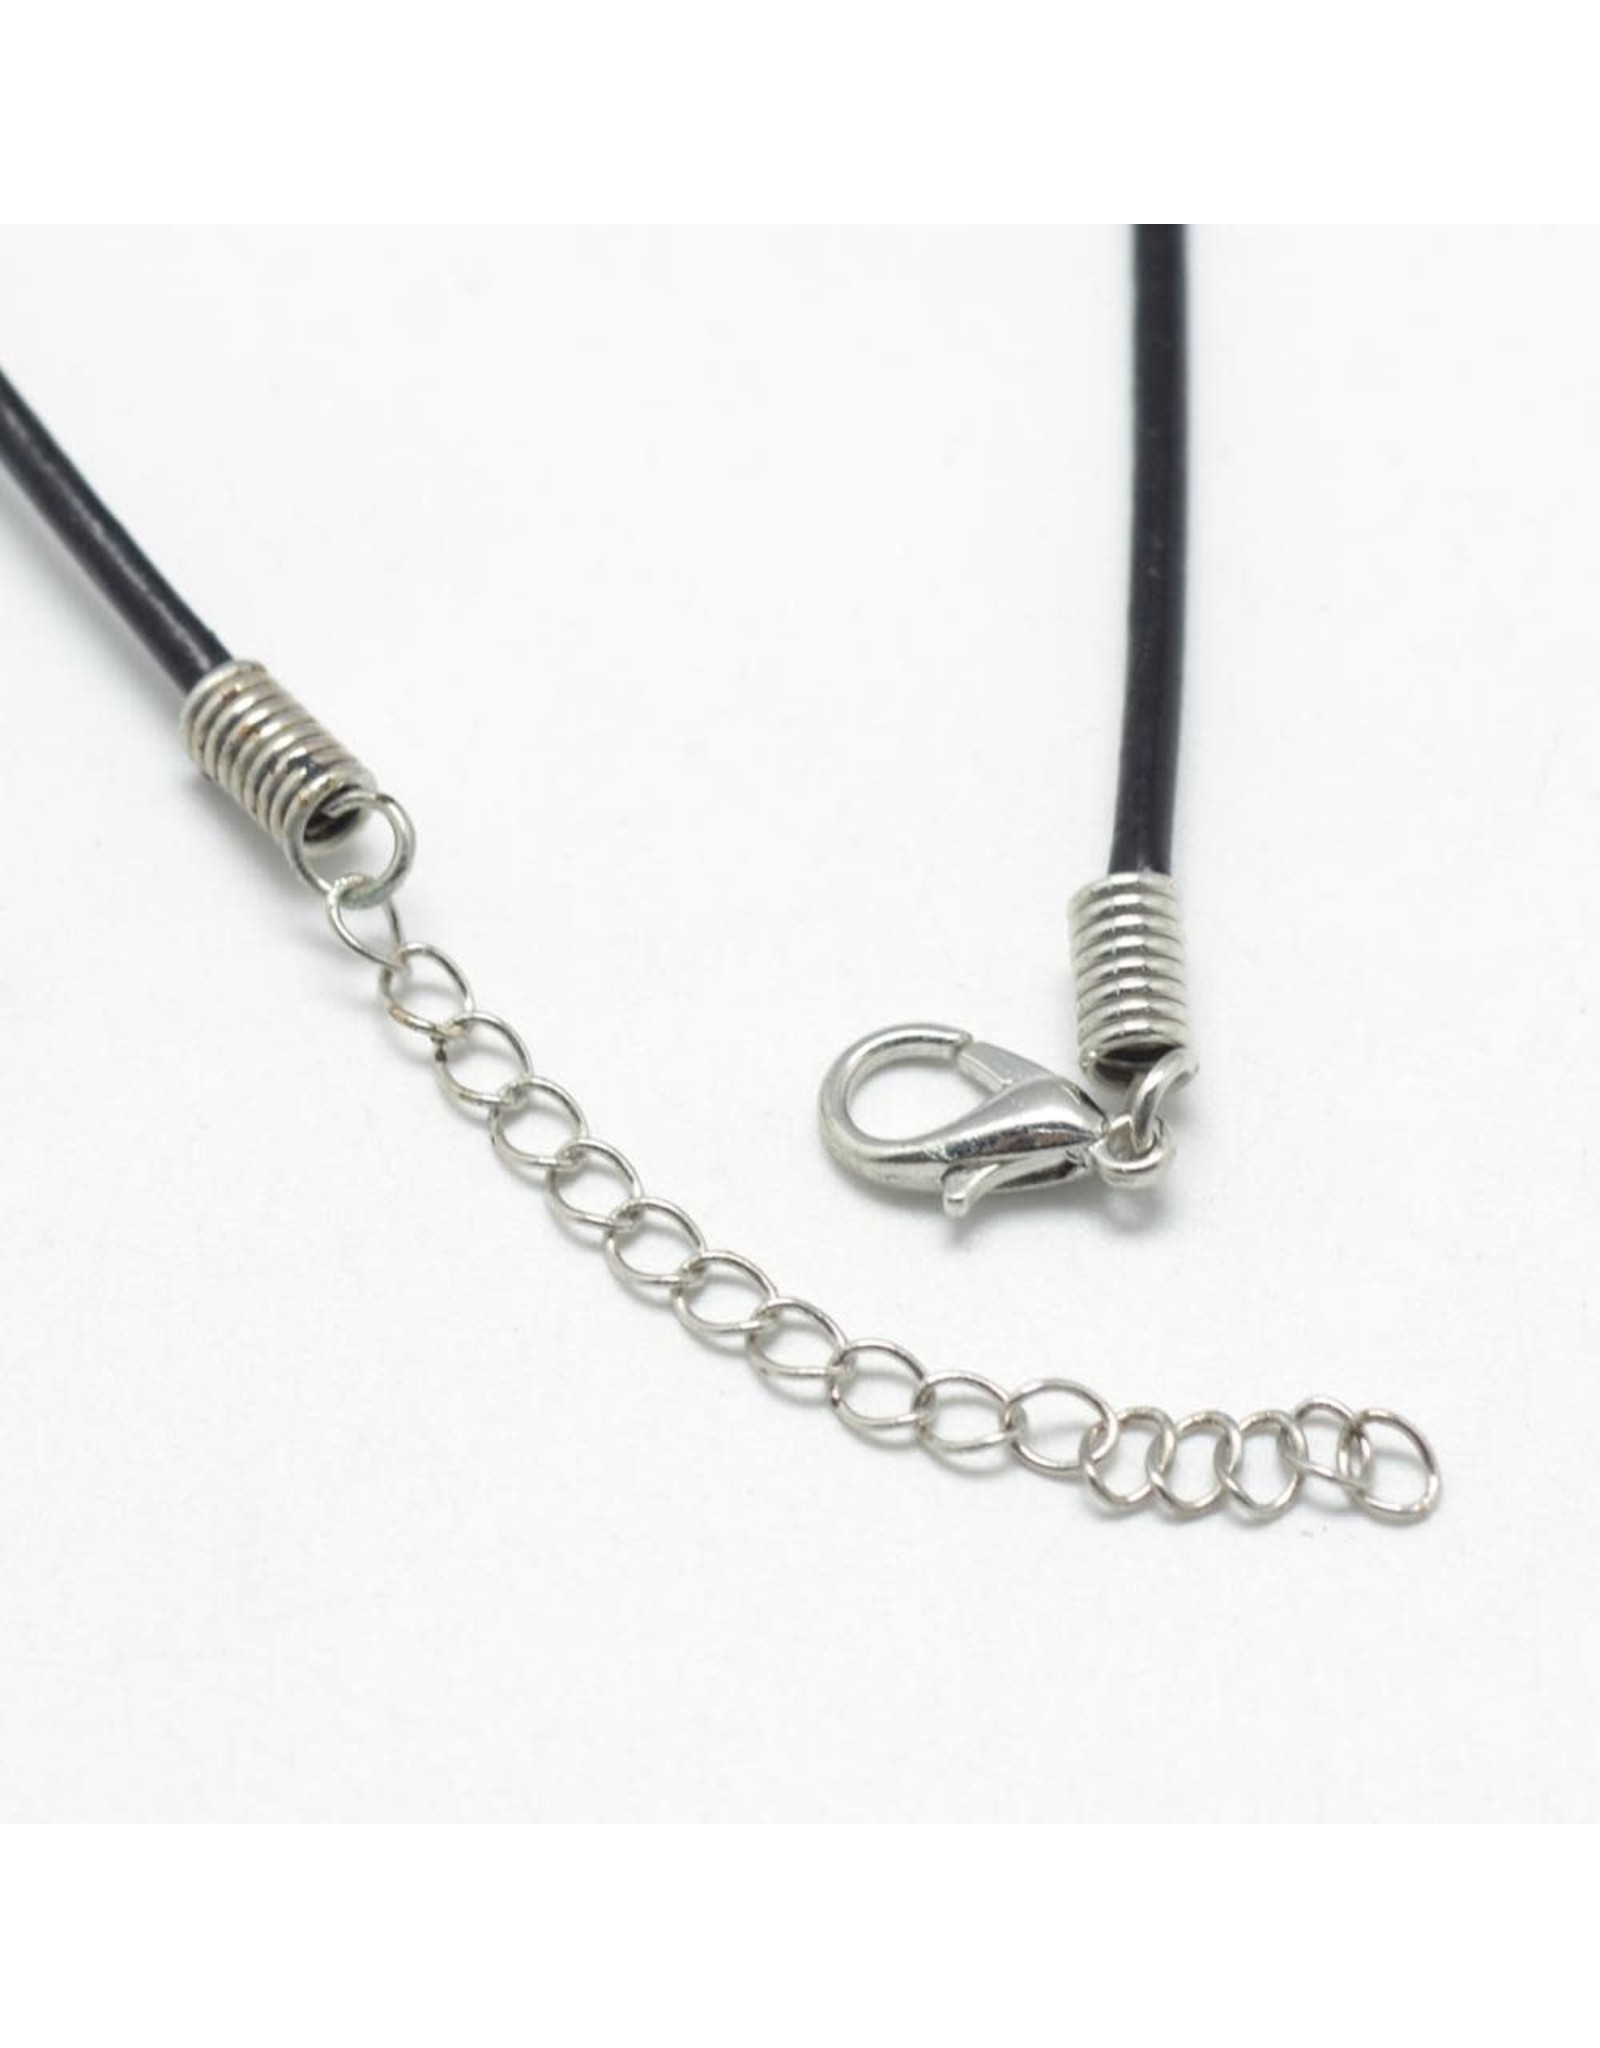 Leather Cord  Necklace 2mm  x18'' Black  x5